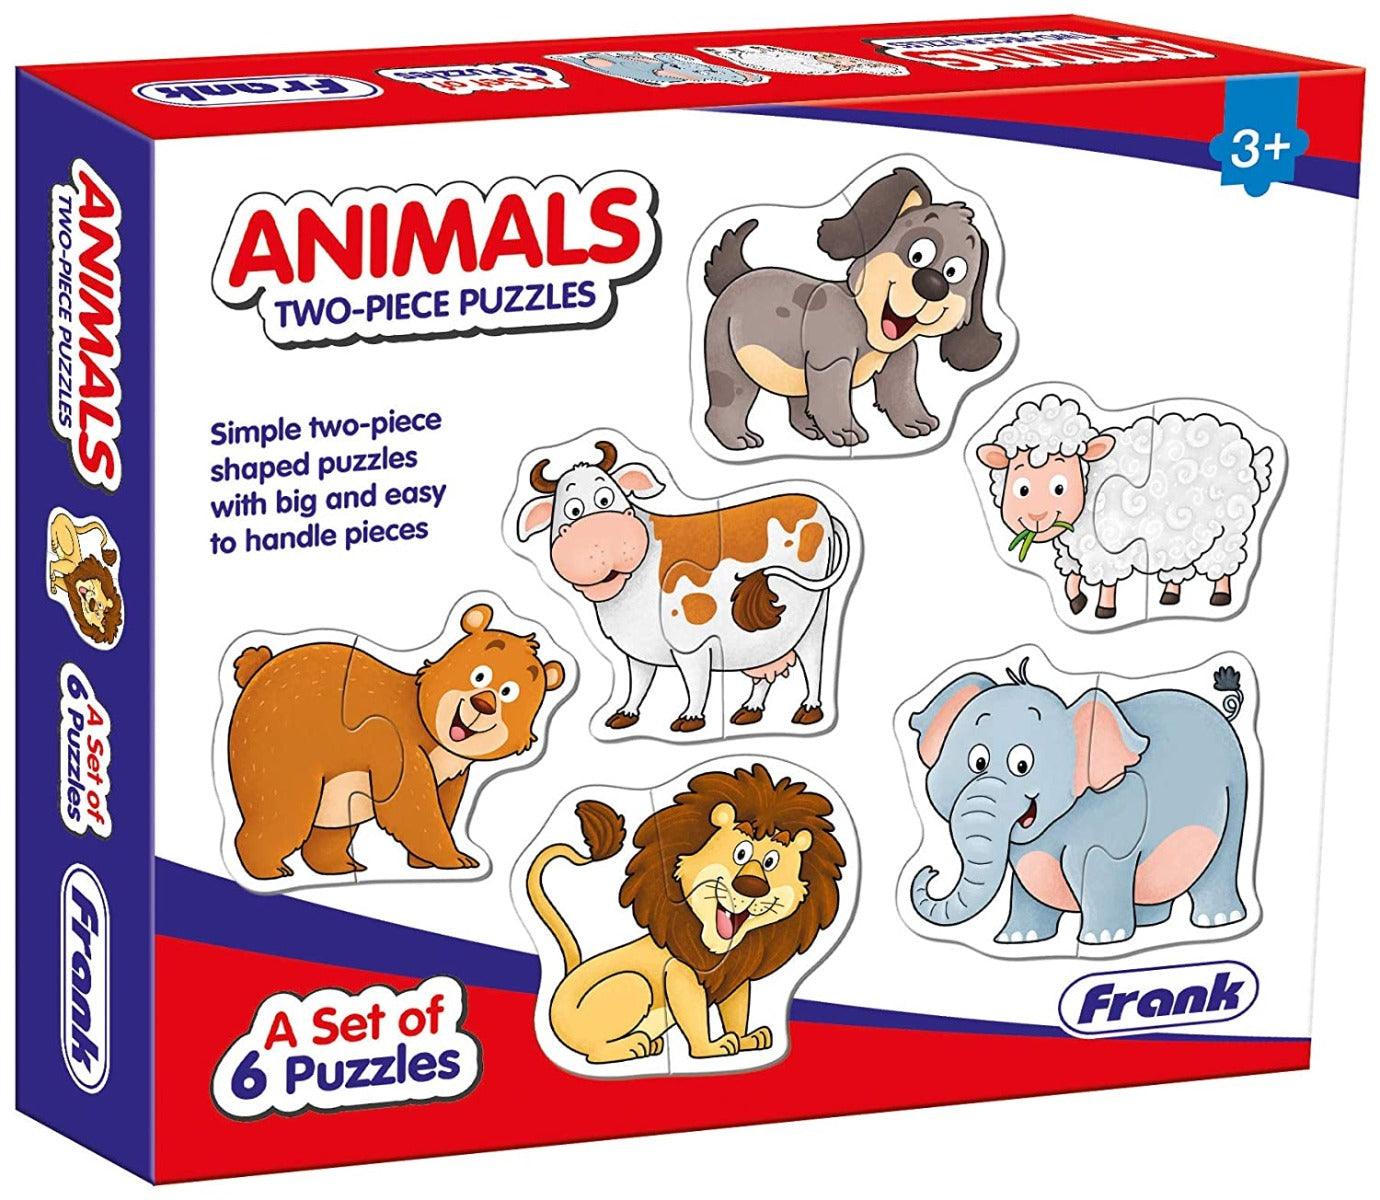 Frank Transport Puzzles - A Set of 6 Two-Piece Shaped Jigsaw Puzzles for 3 Year Old Kids and Above